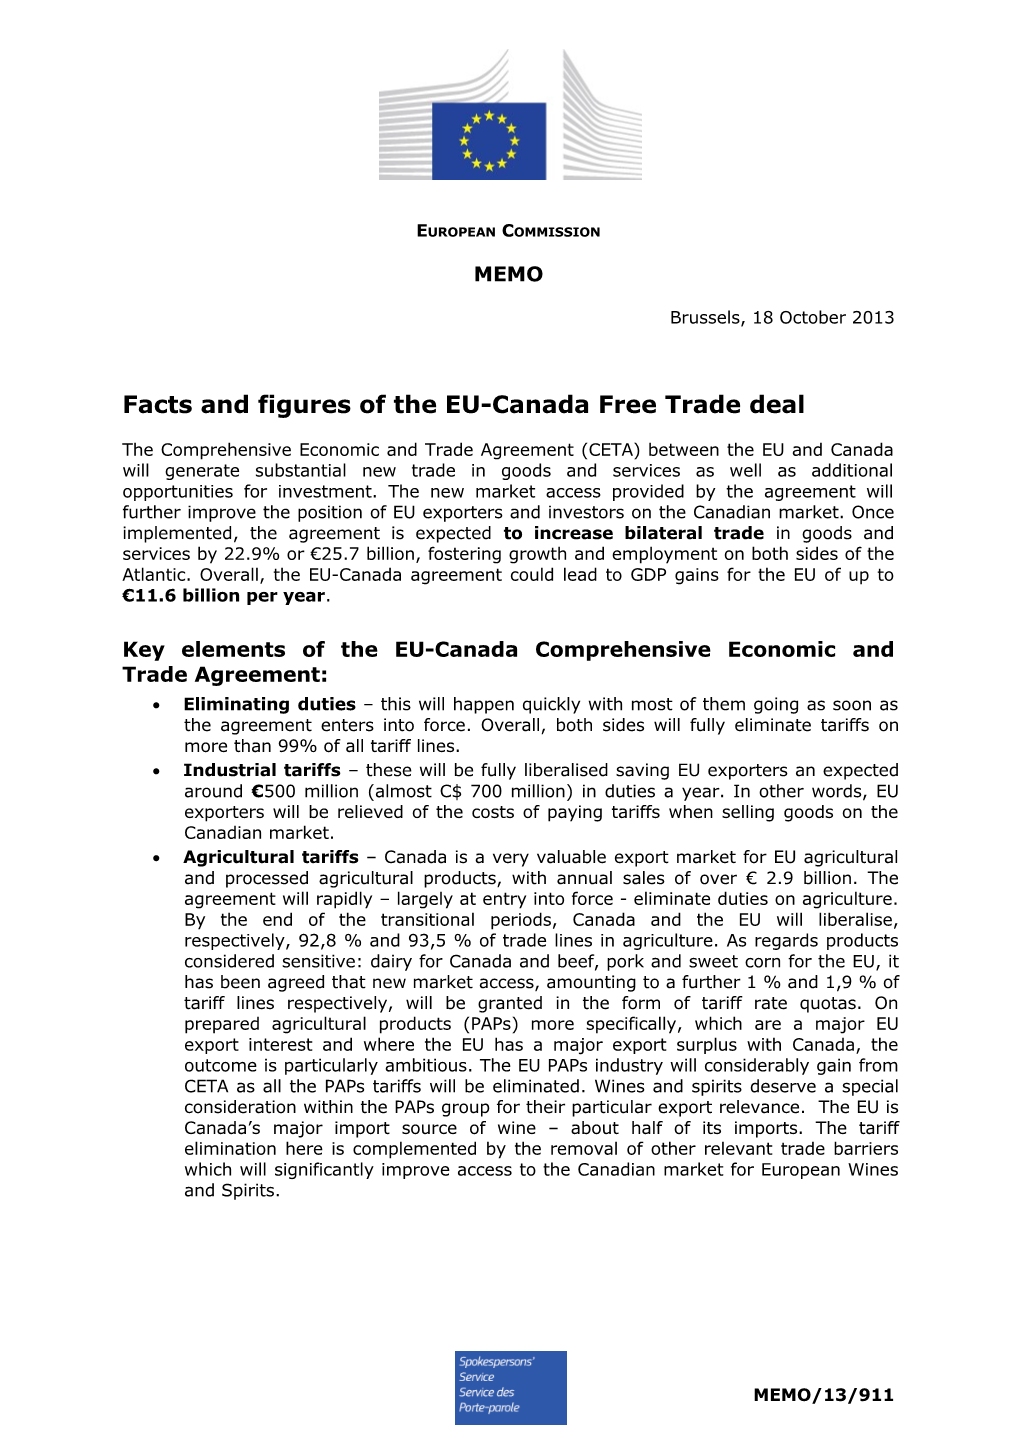 Facts and Figures of the EU-Canada Free Trade Deal